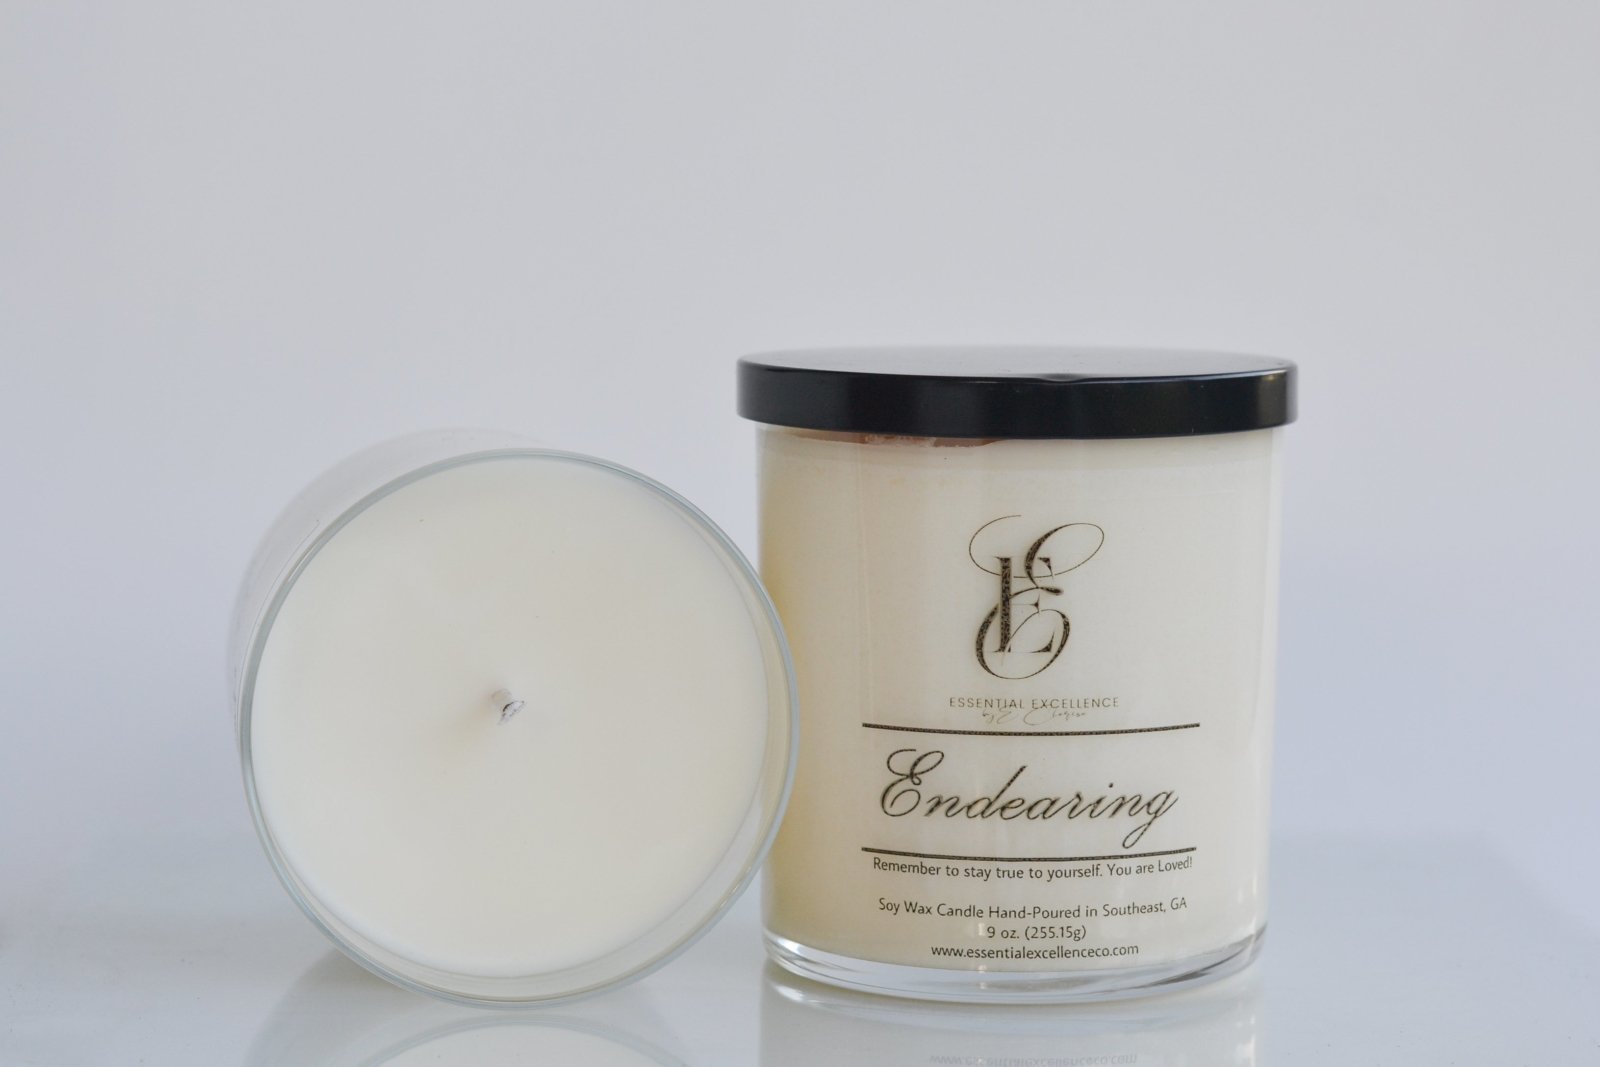 Endearing - Essential Excellence Co.